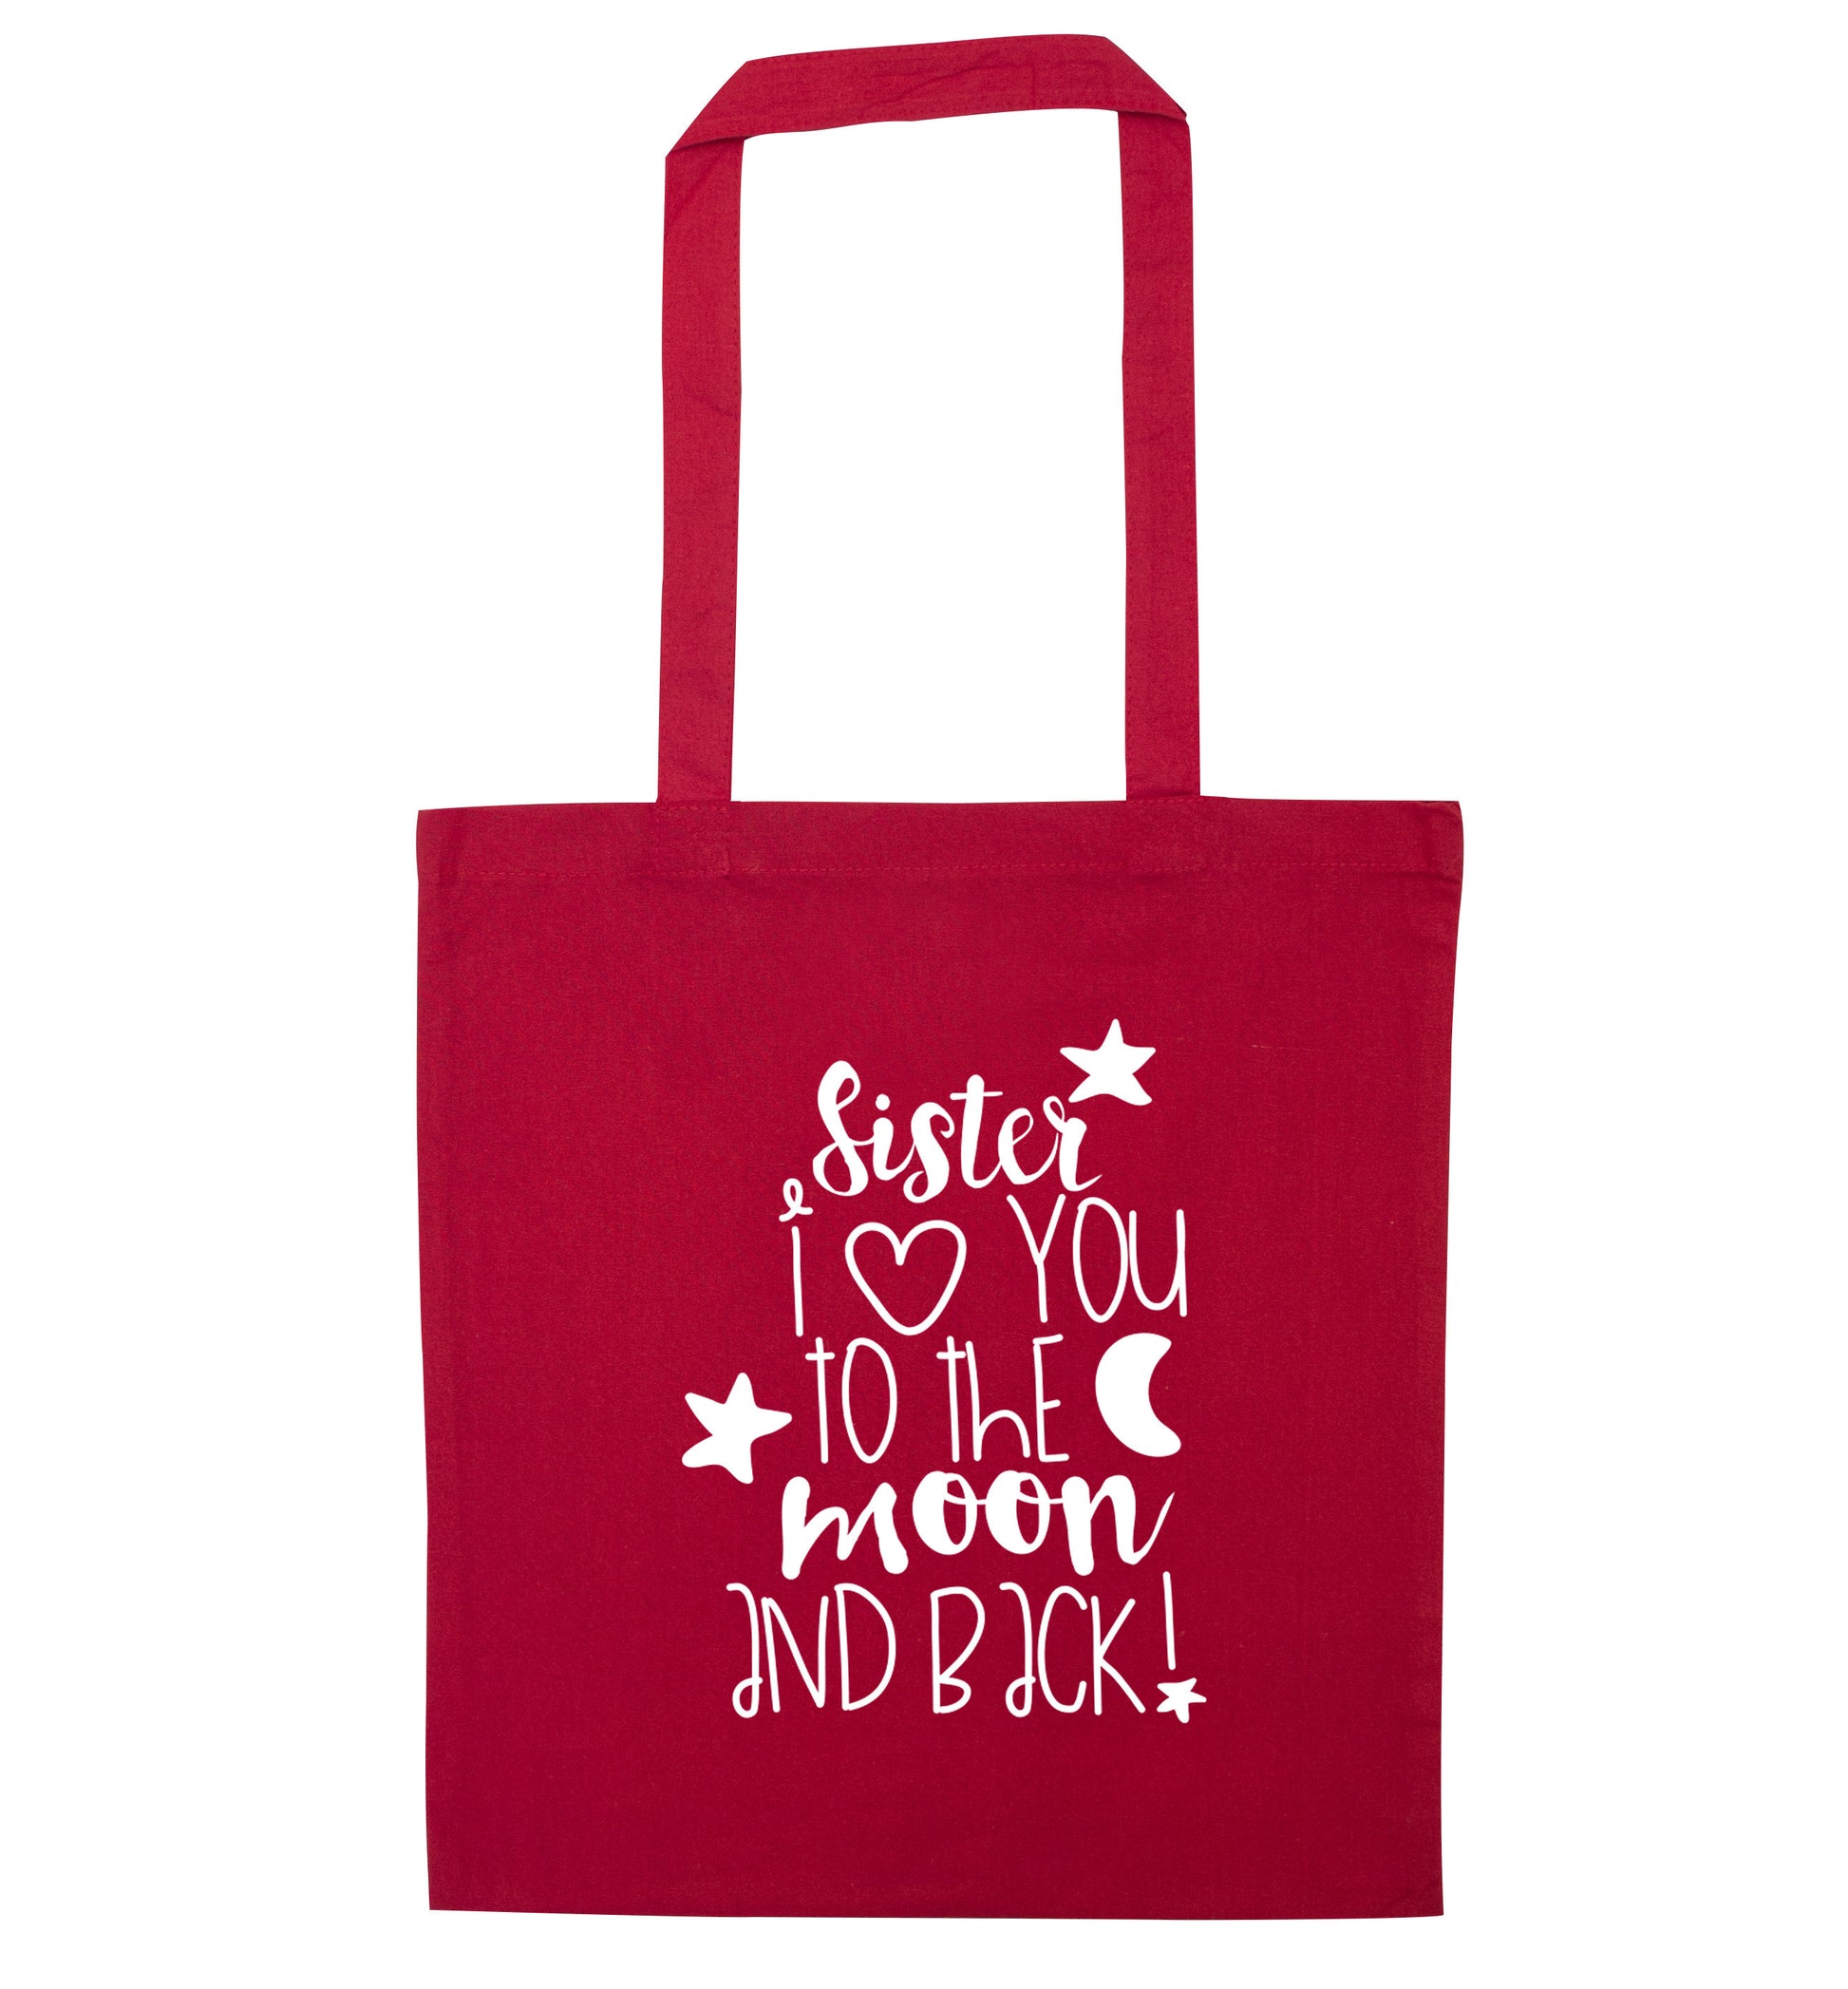 Sister I love you to the moon and back red tote bag